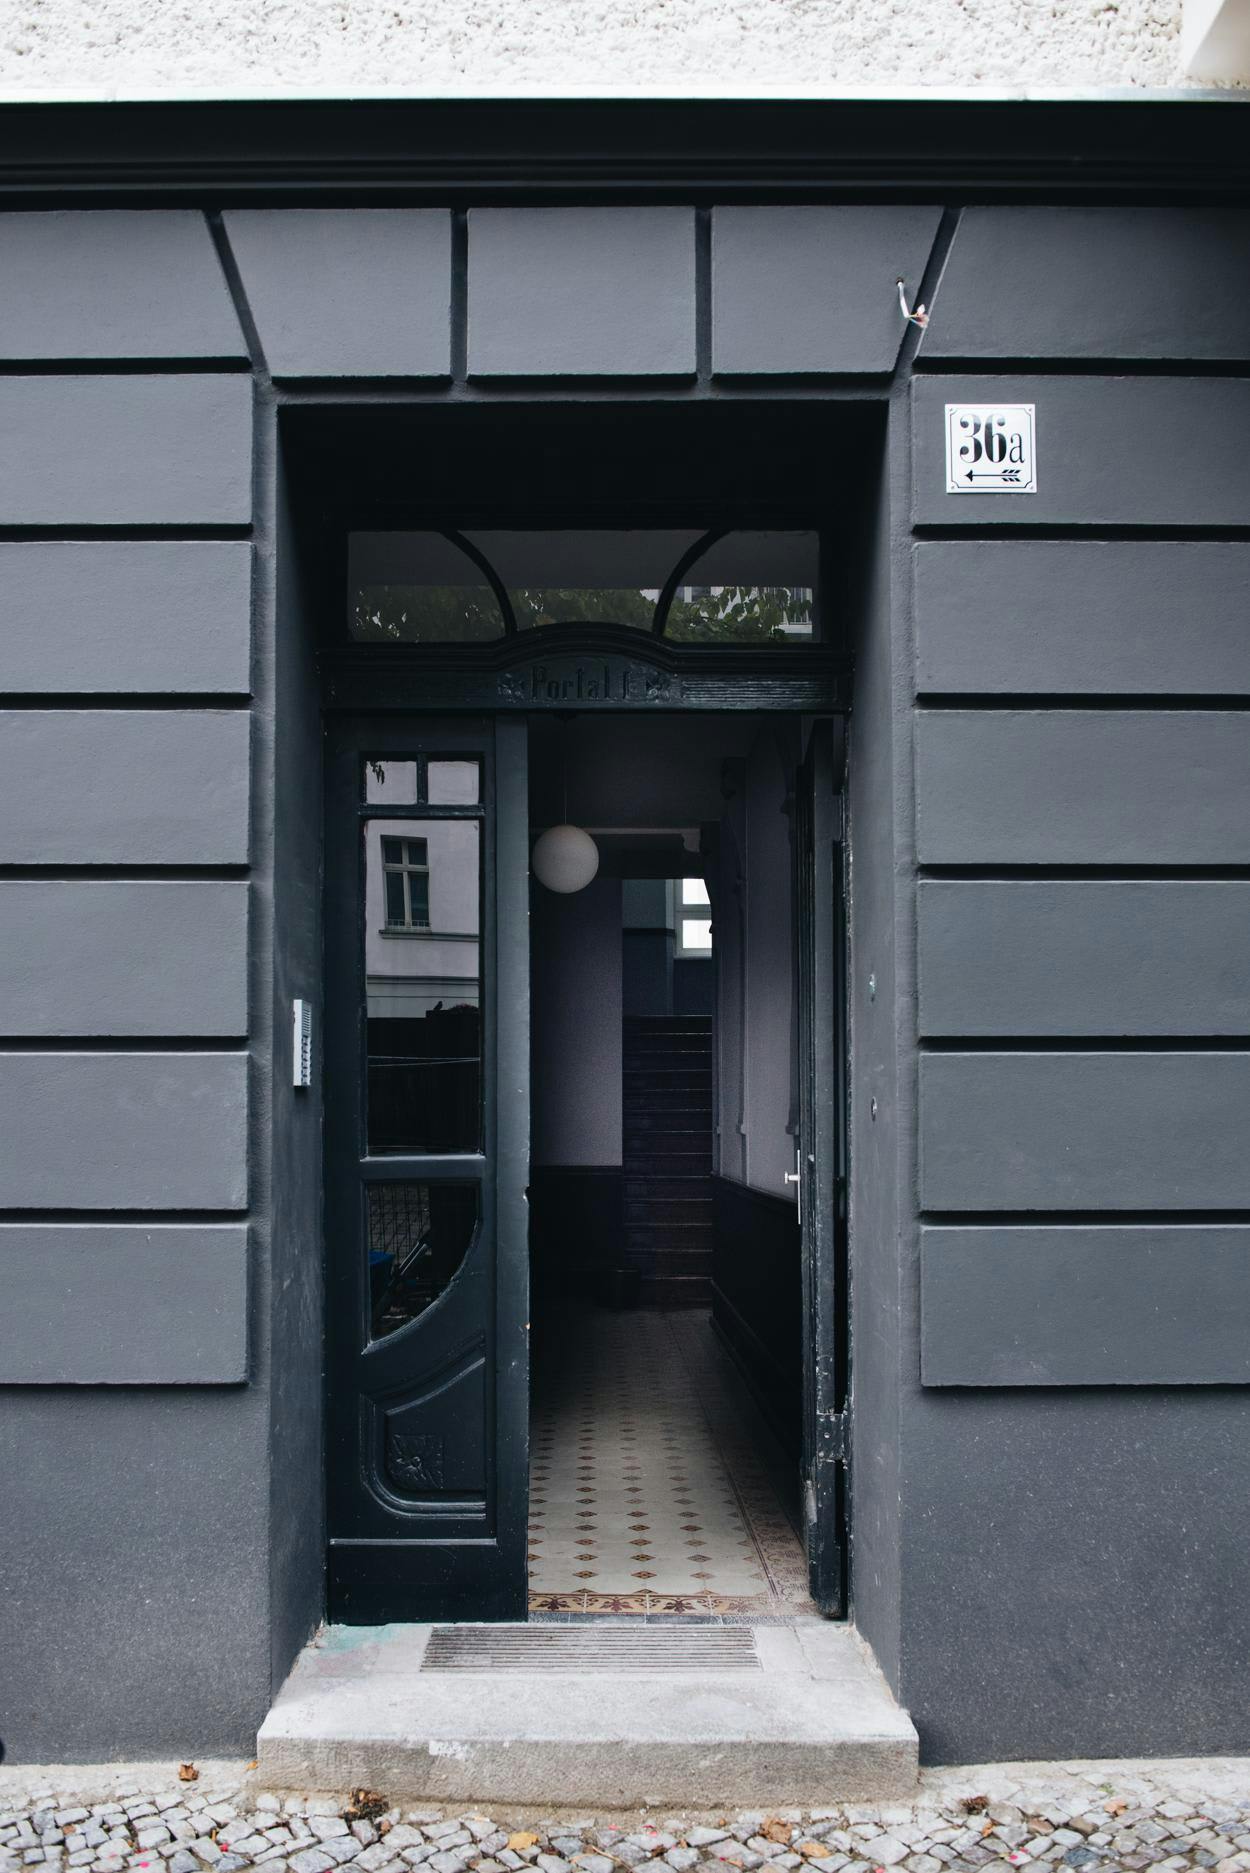 The image features a large, dark building with a black doorway and a sign on the side. The doorway is open, revealing a small, dark room inside. The room appears to be a storage area, as there is a small, dark room with a doorway and a sign on the side. The sign is located near the top of the doorway, and the room appears to be empty.

The building is situated next to a sidewalk, and there is a bench nearby, possibly for people to sit and rest. The scene conveys a sense of a quiet, empty space within the building.